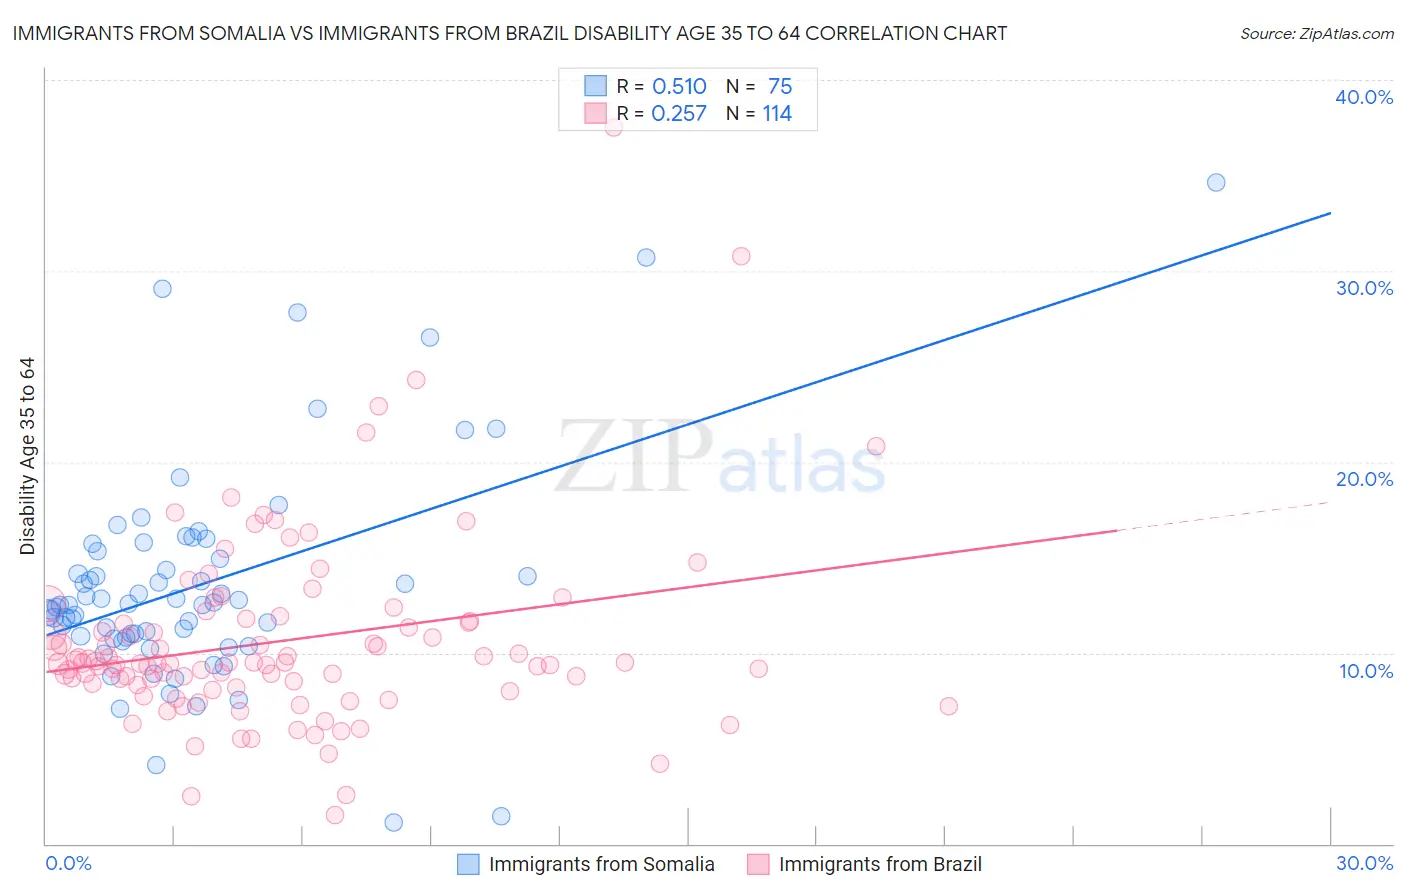 Immigrants from Somalia vs Immigrants from Brazil Disability Age 35 to 64